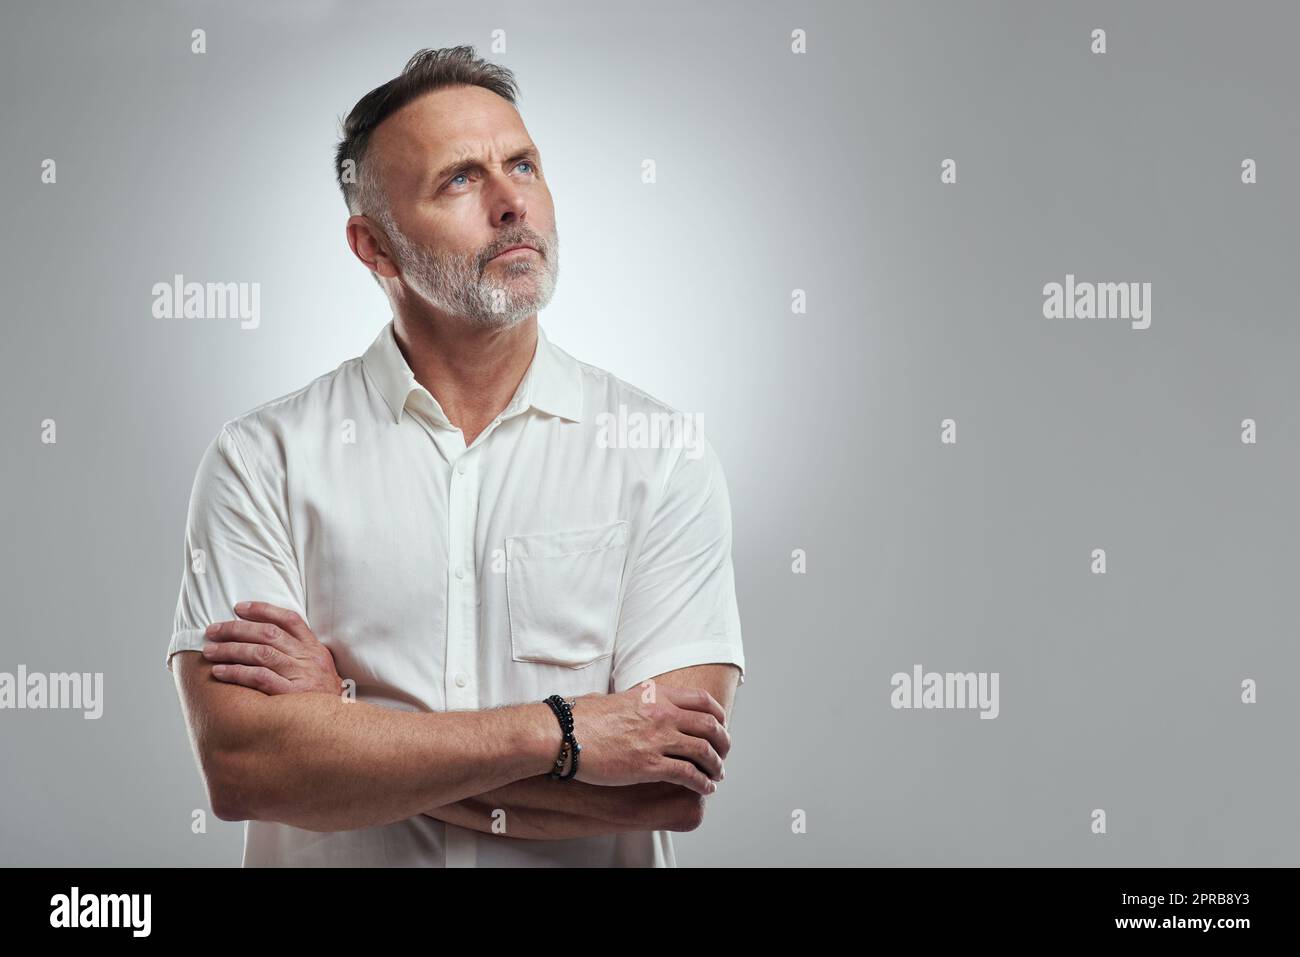 My brain doesnt like to be quiet. Studio shot of a mature man looking thoughtful against a grey background. Stock Photo